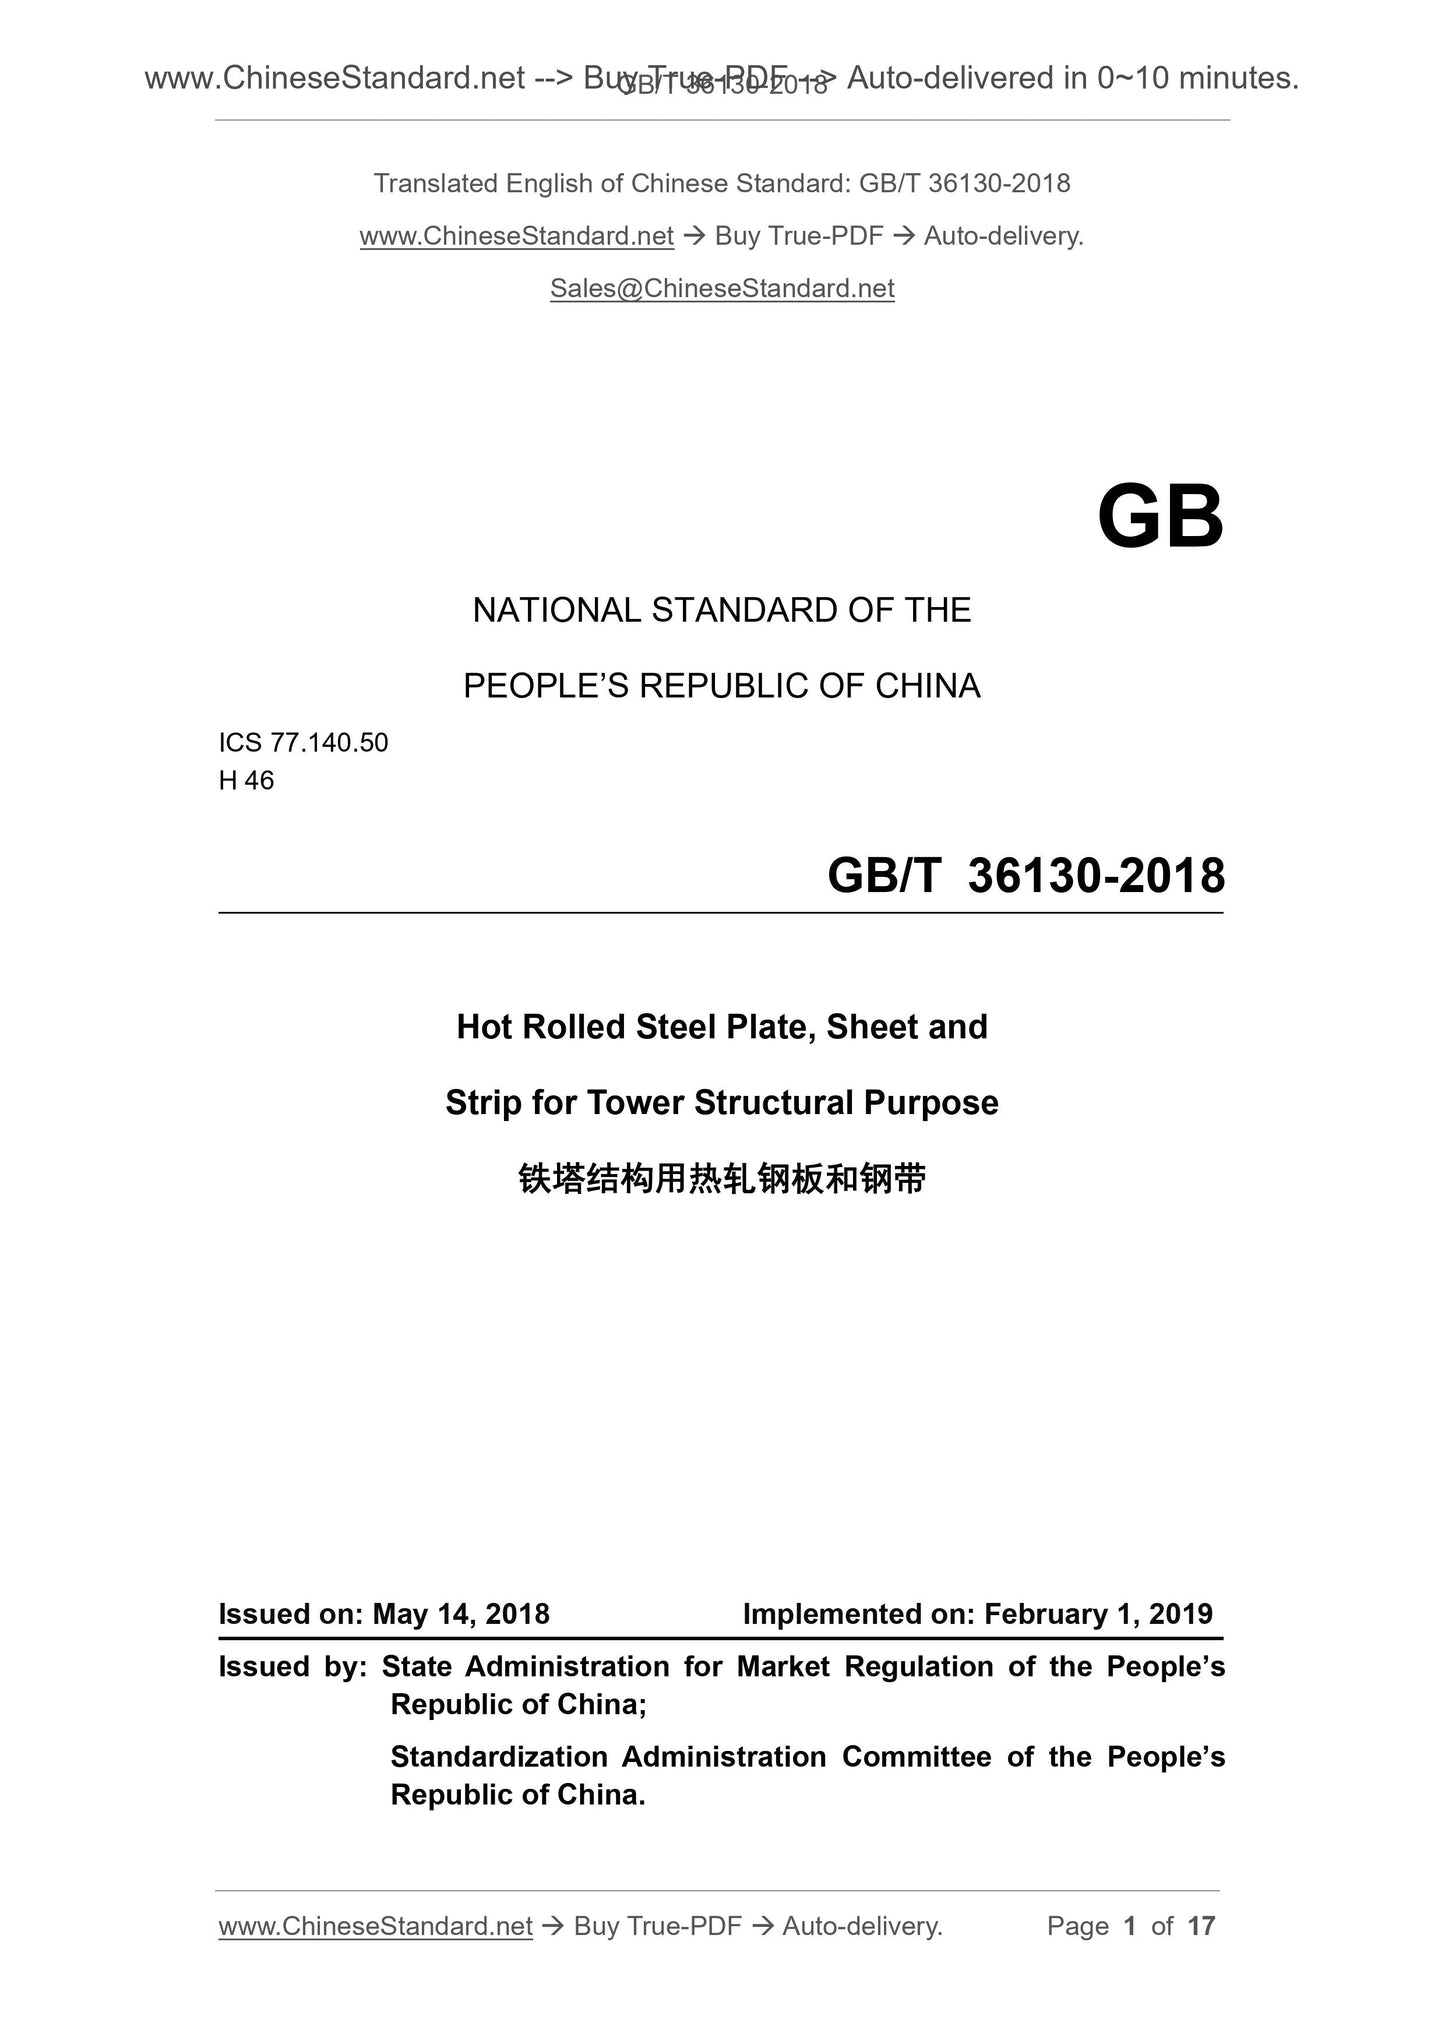 GB/T 36130-2018 Page 1